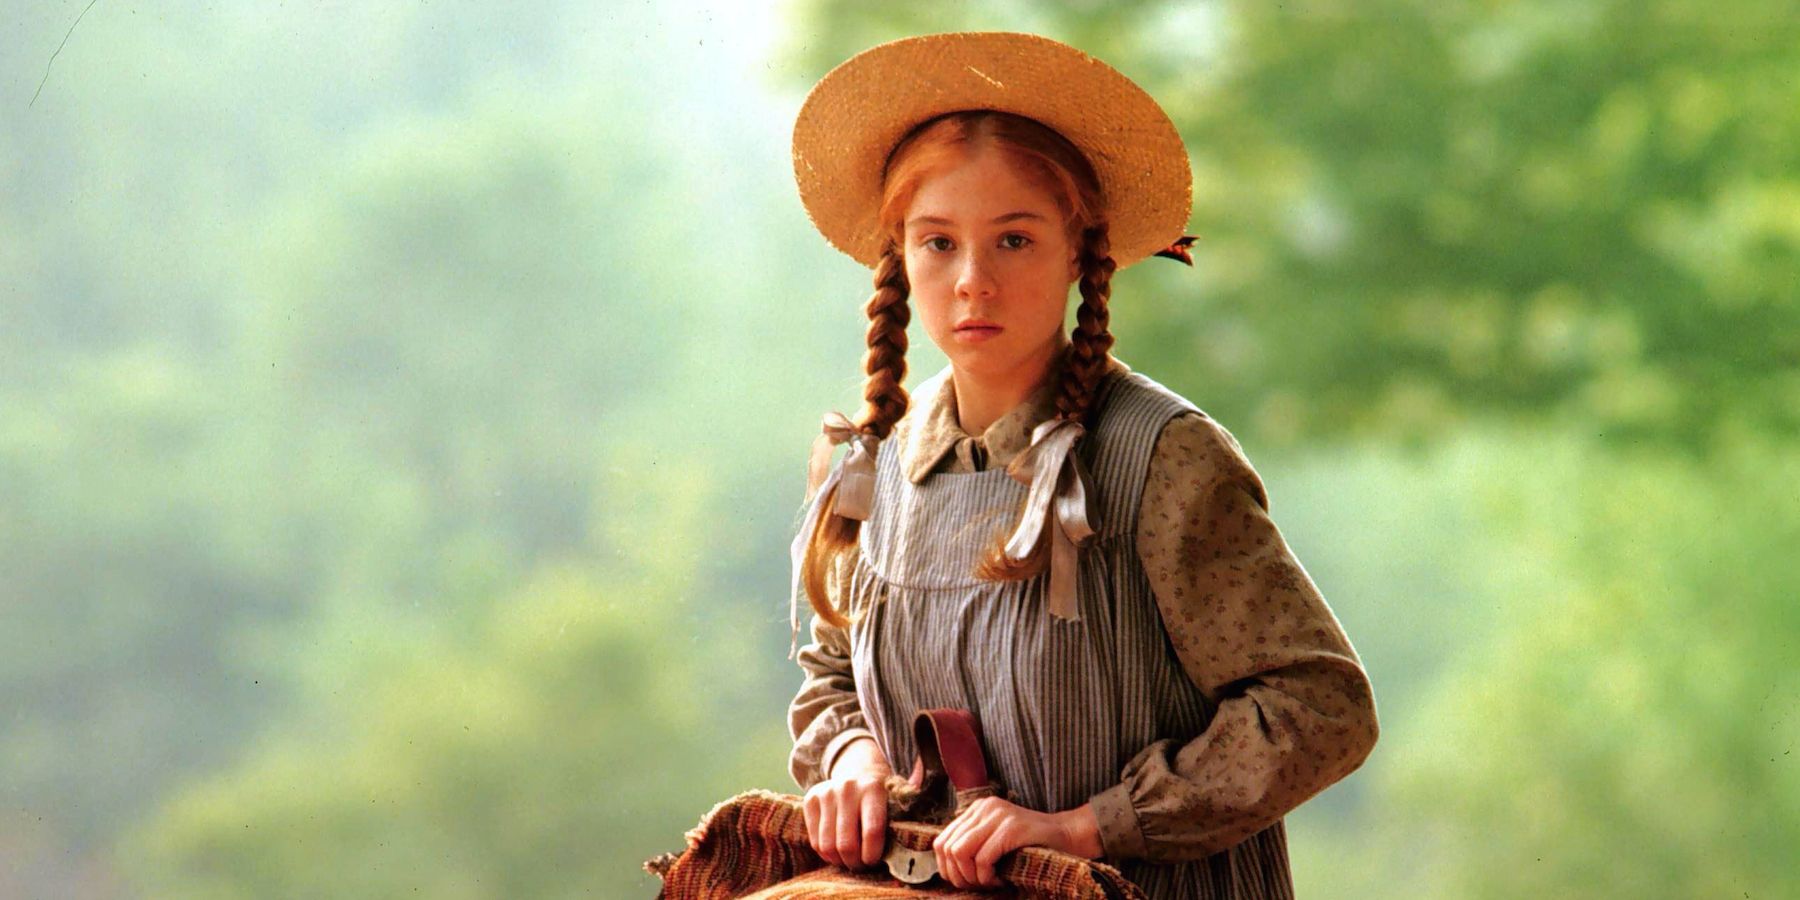 8 Things Anne With An E Did Better Than 1985’s Anne Of Green Gables (& 7 Anne Of Green Gables Did Better Than Anne With An E)